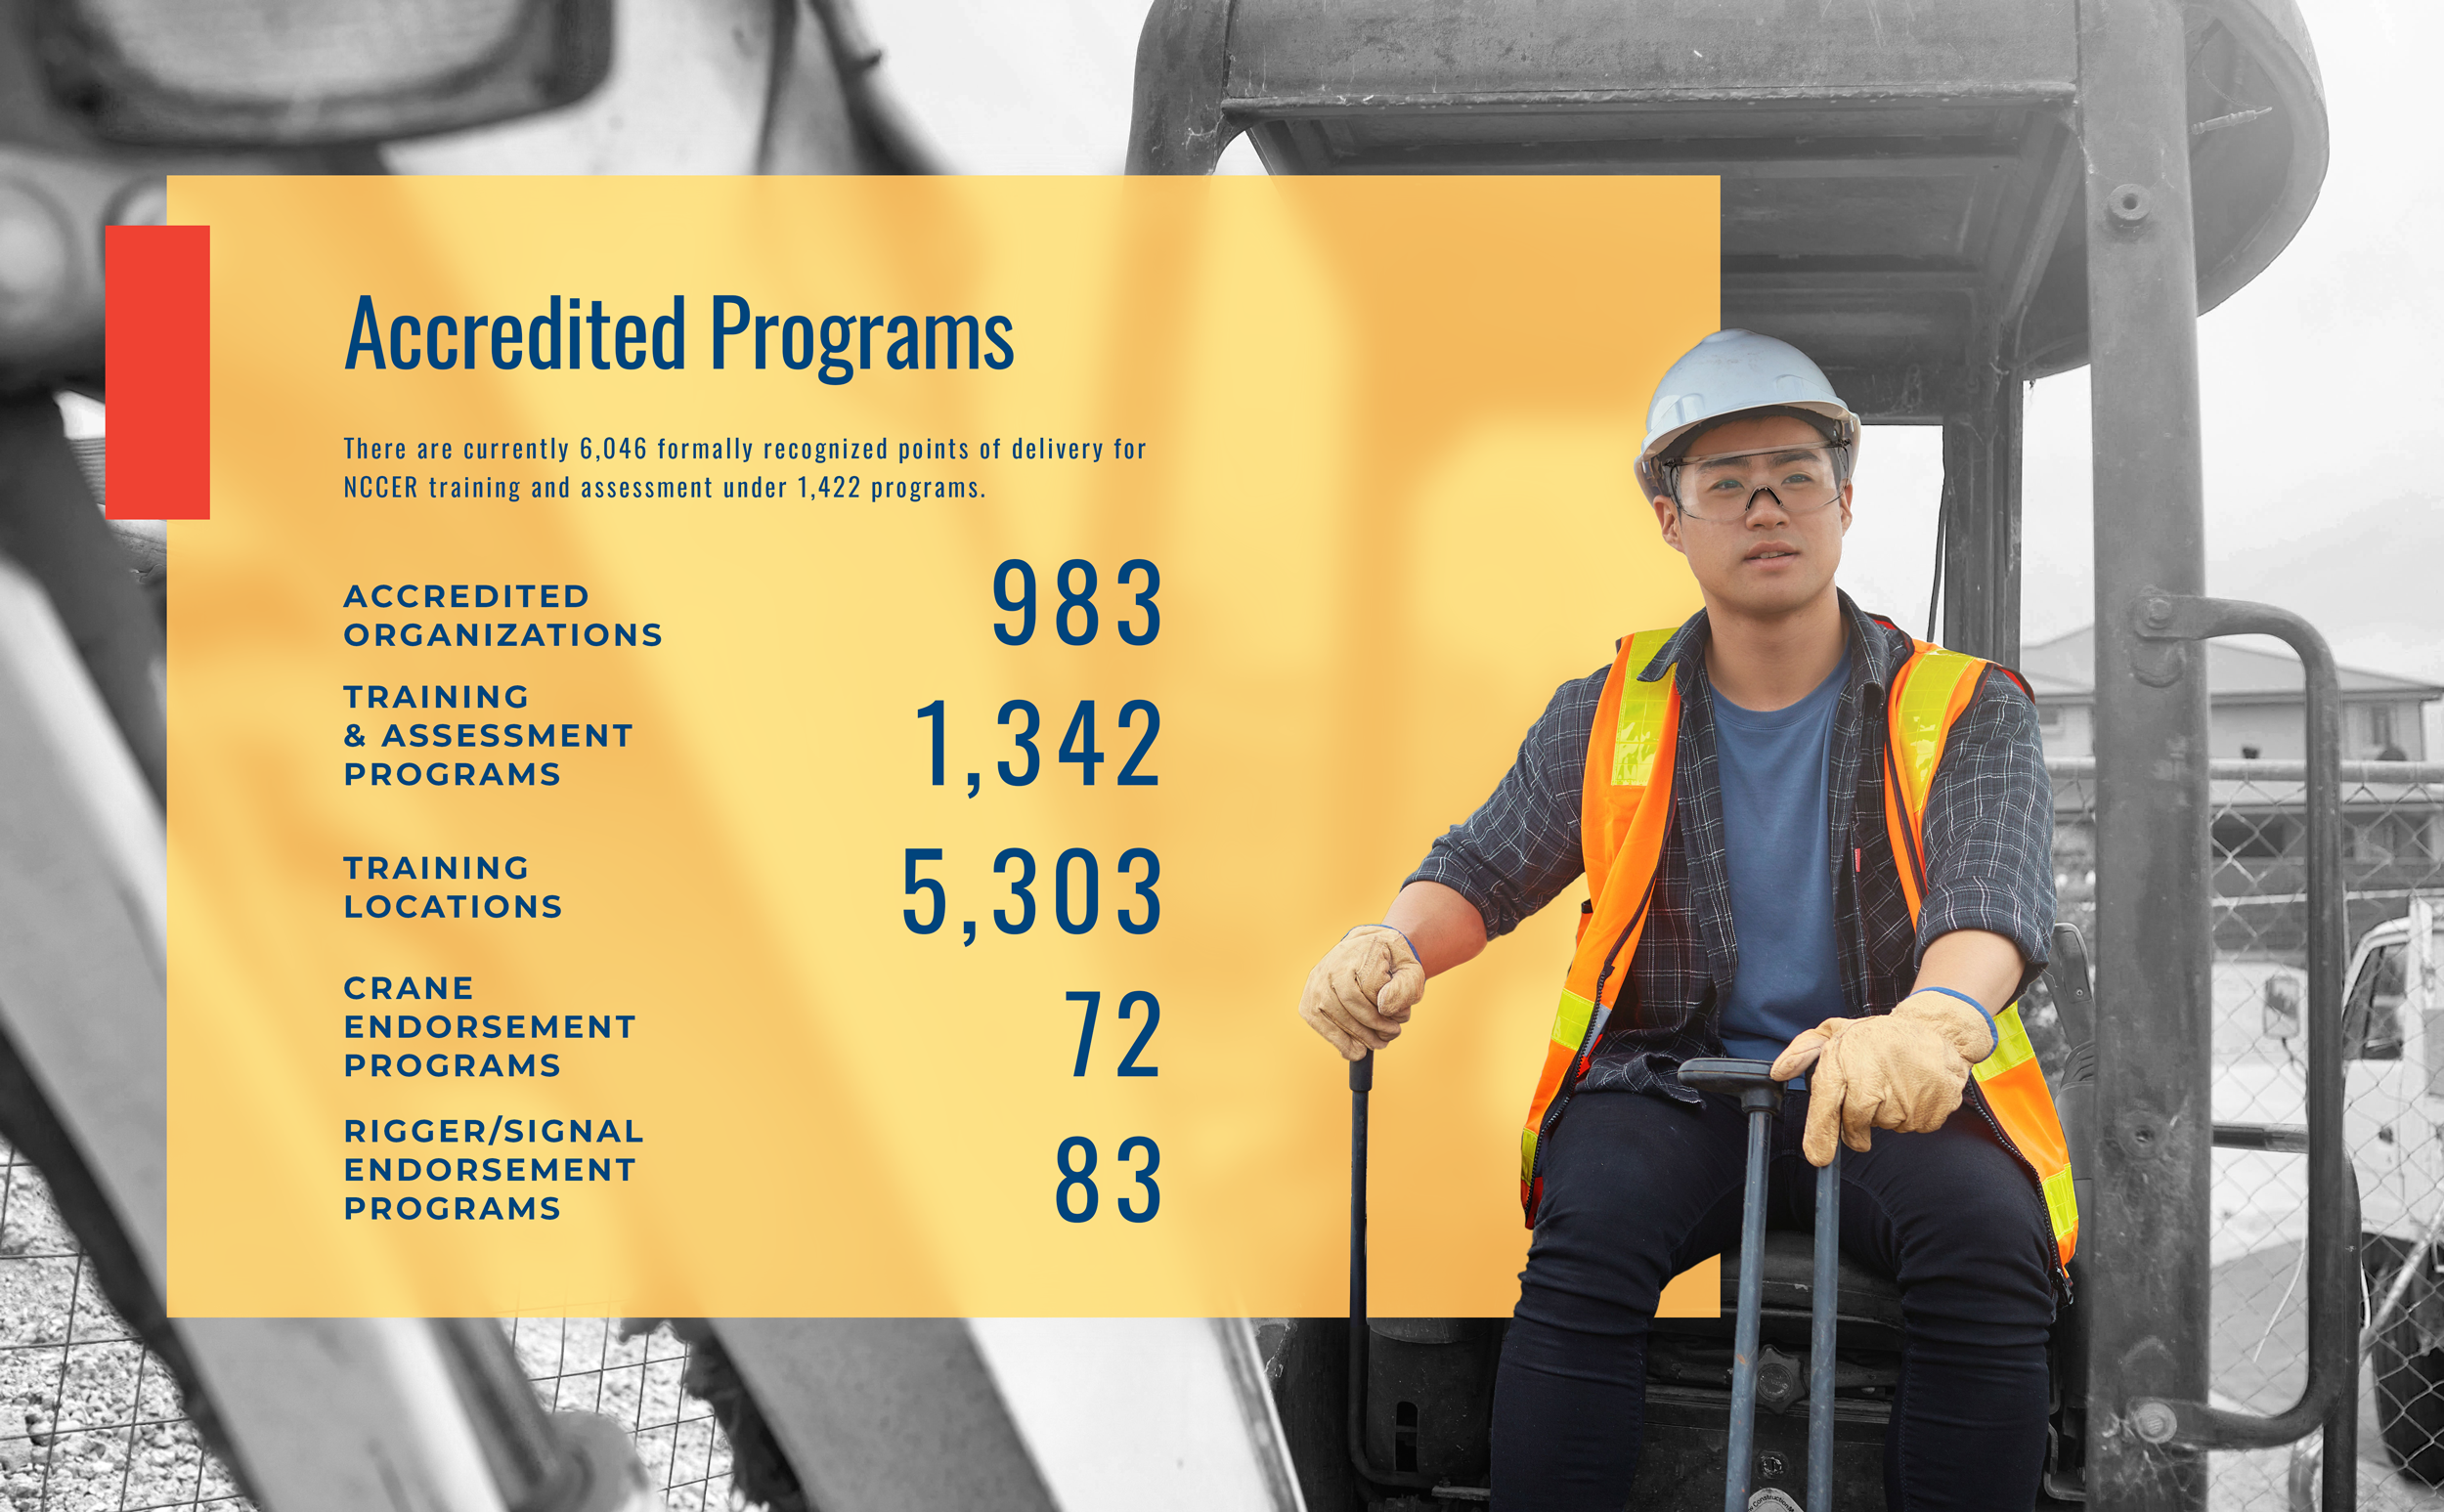 Accredited Programs. There are currently 6,046 formally recognized points of delivery for NCCER training and assessment under 1,422 programs. Accredited Organizations: 983. Training & Assessment Programs: 1,342. Training Locations: 5,303. Crane Endorsement Programs: 72. Rigger/Signal Endorsement Programs: 83.